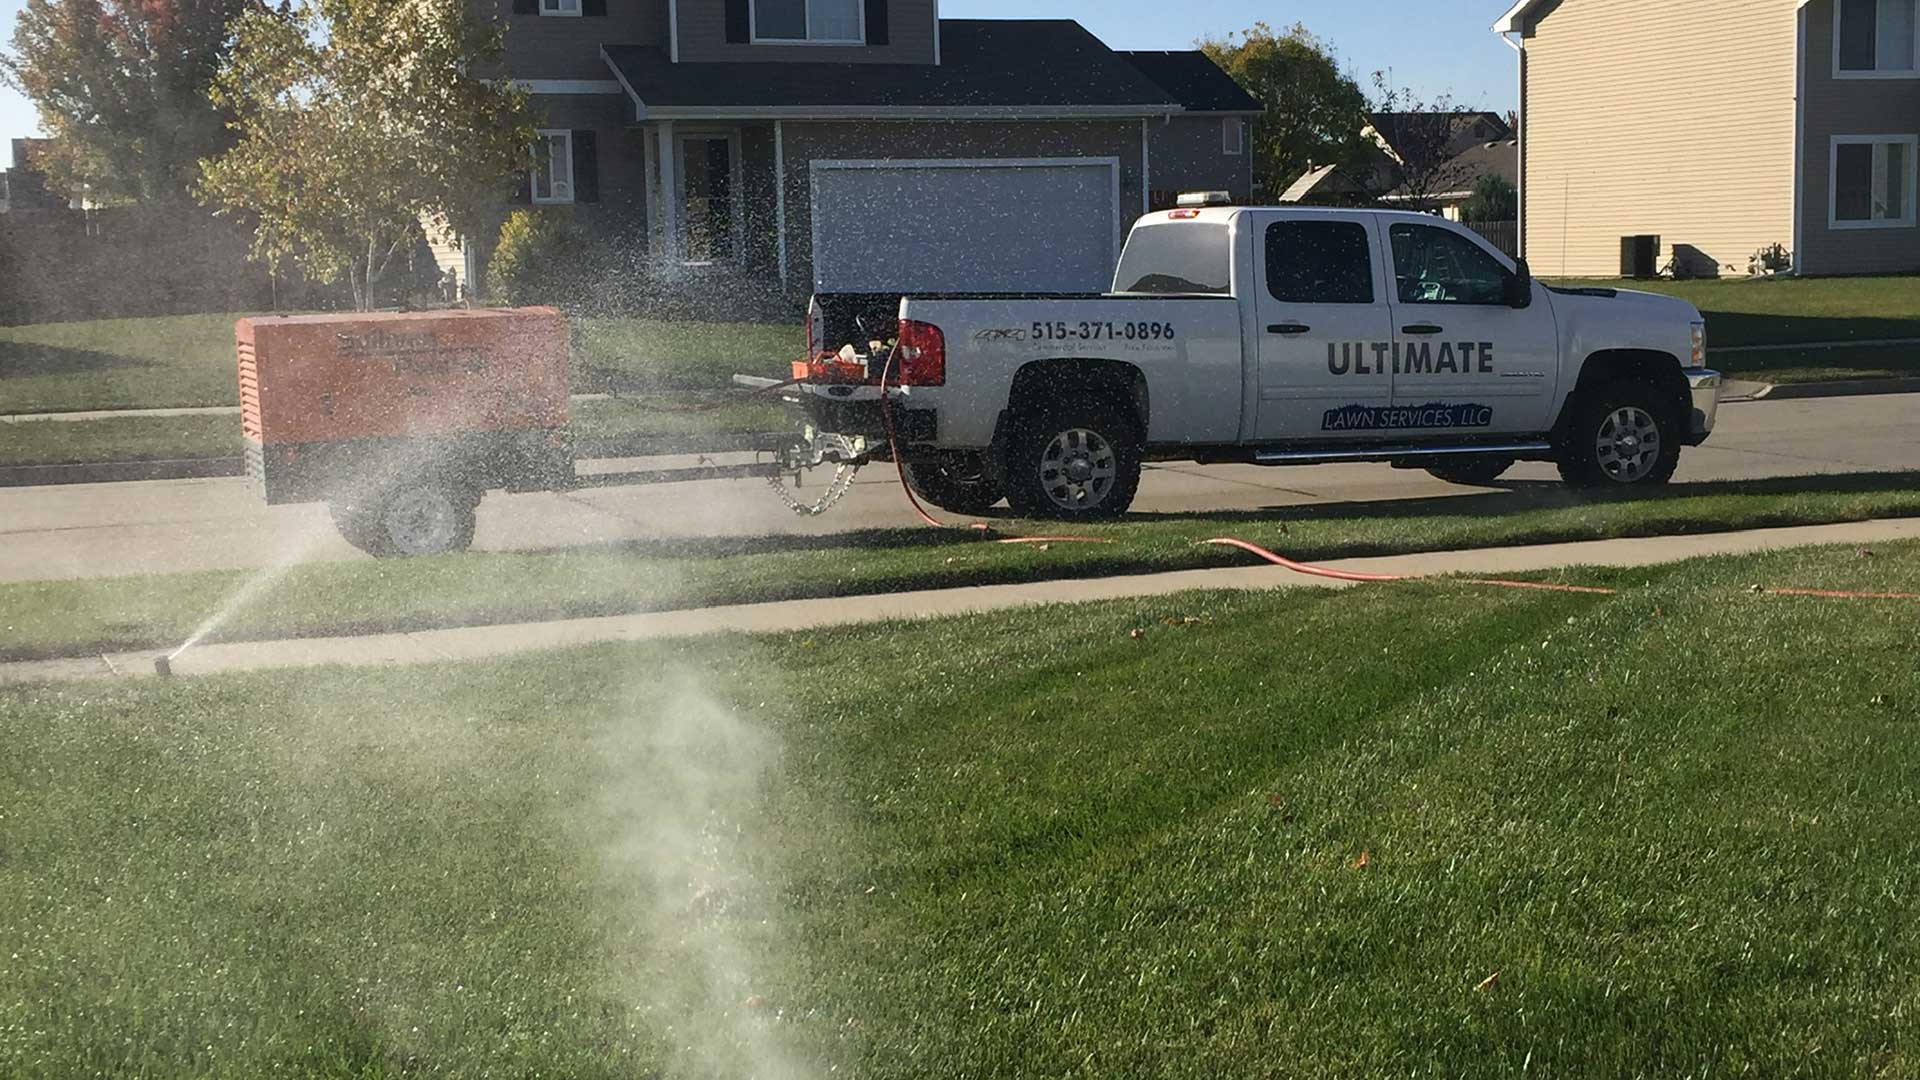 Ultimate Lawn Services work truck at a home in Urbandale, IA.